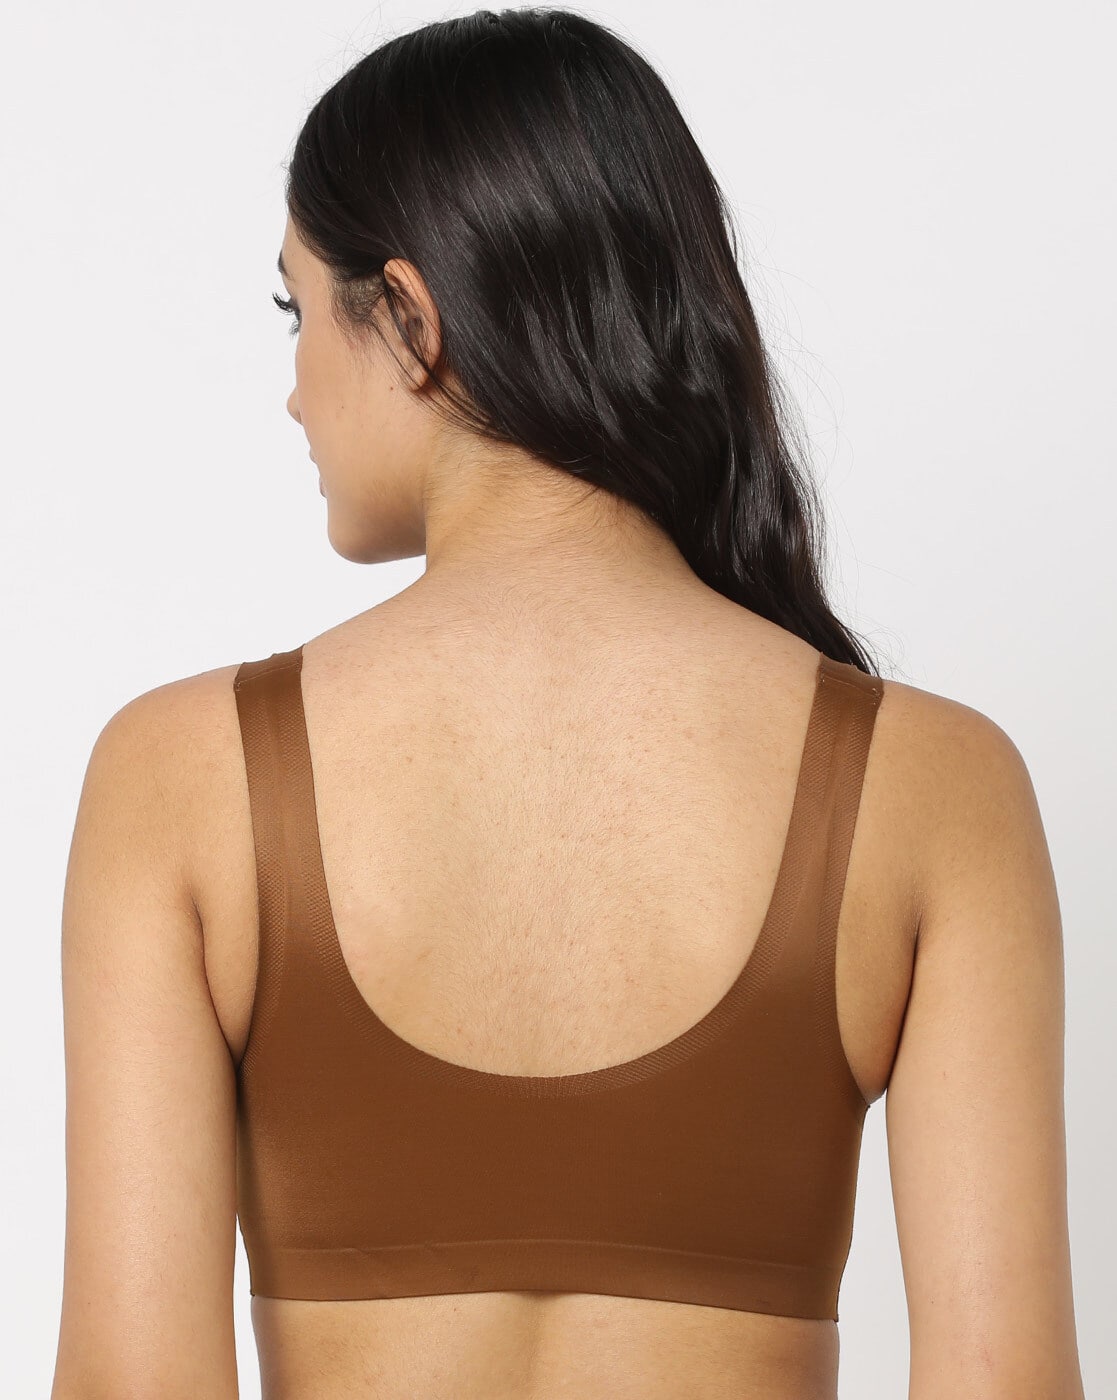 Crop Shop Boutique CSB Lea Bra In Faded Mocha Brown - $40 - From Cindy